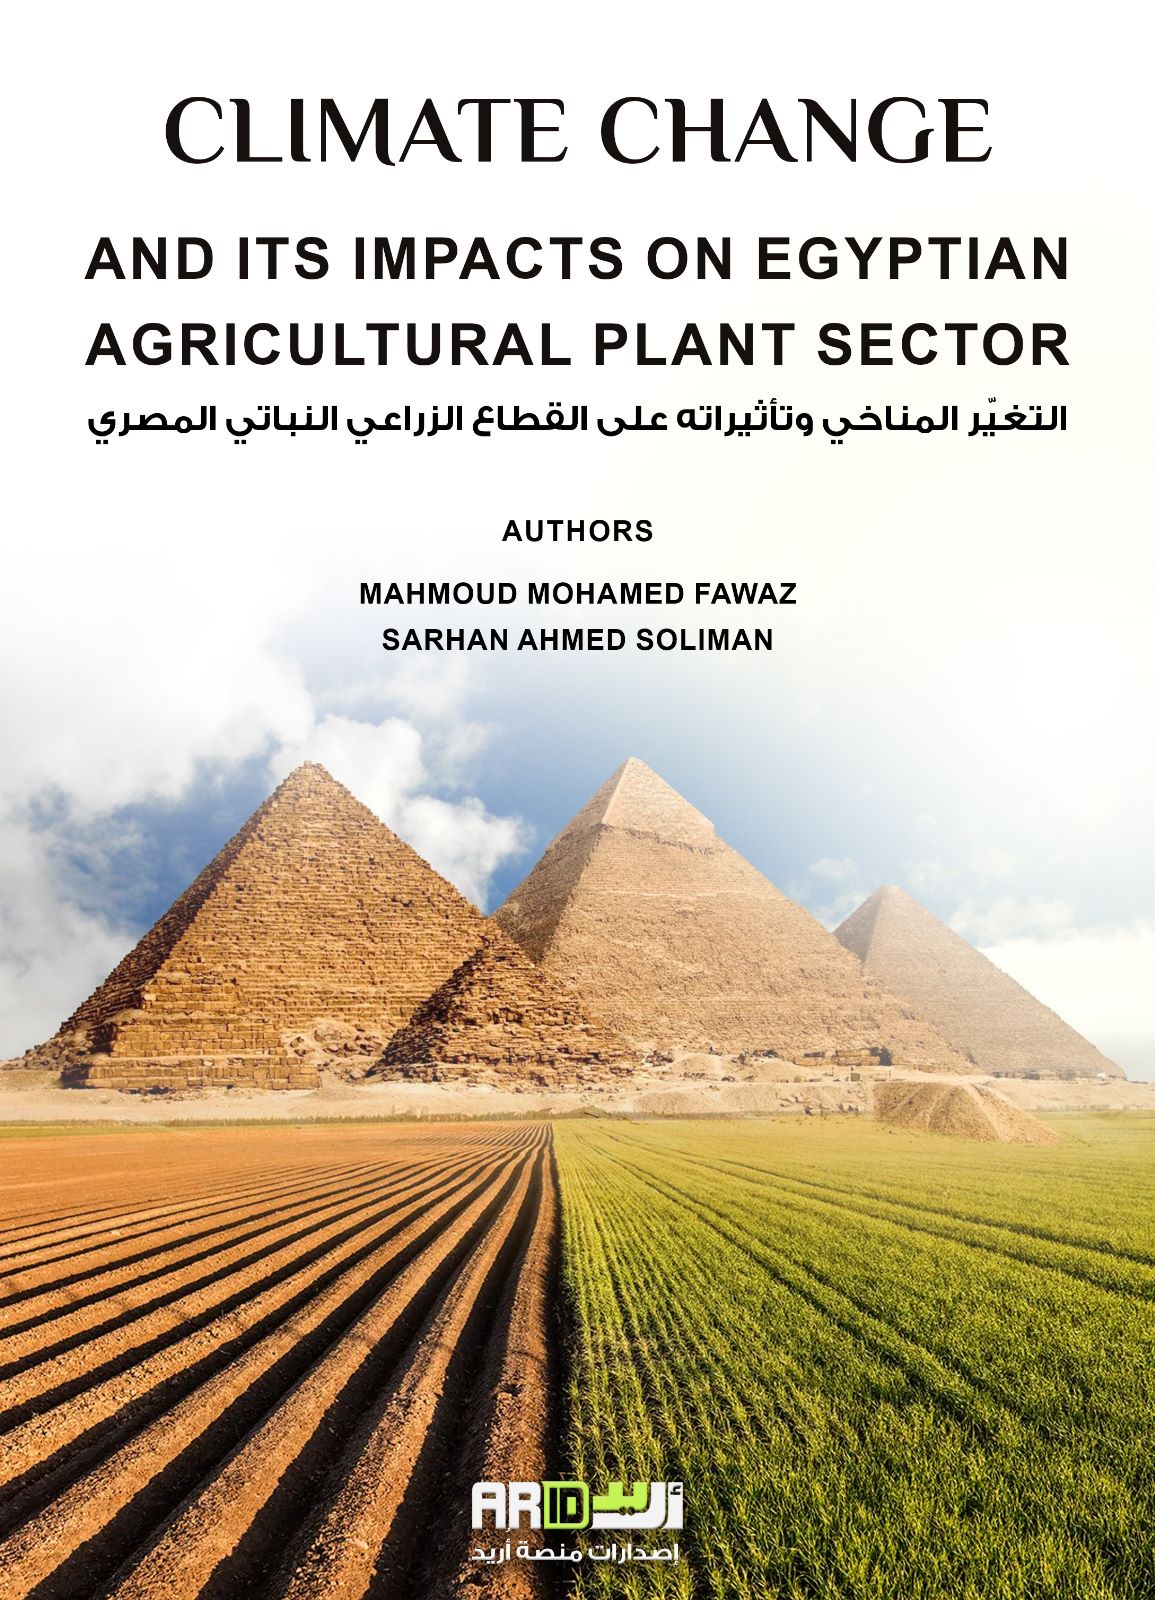 CLIMATE CHANGE AND ITS IMPACTS ON EGYPTIAN AGRICULTURAL PLANT SECTOR